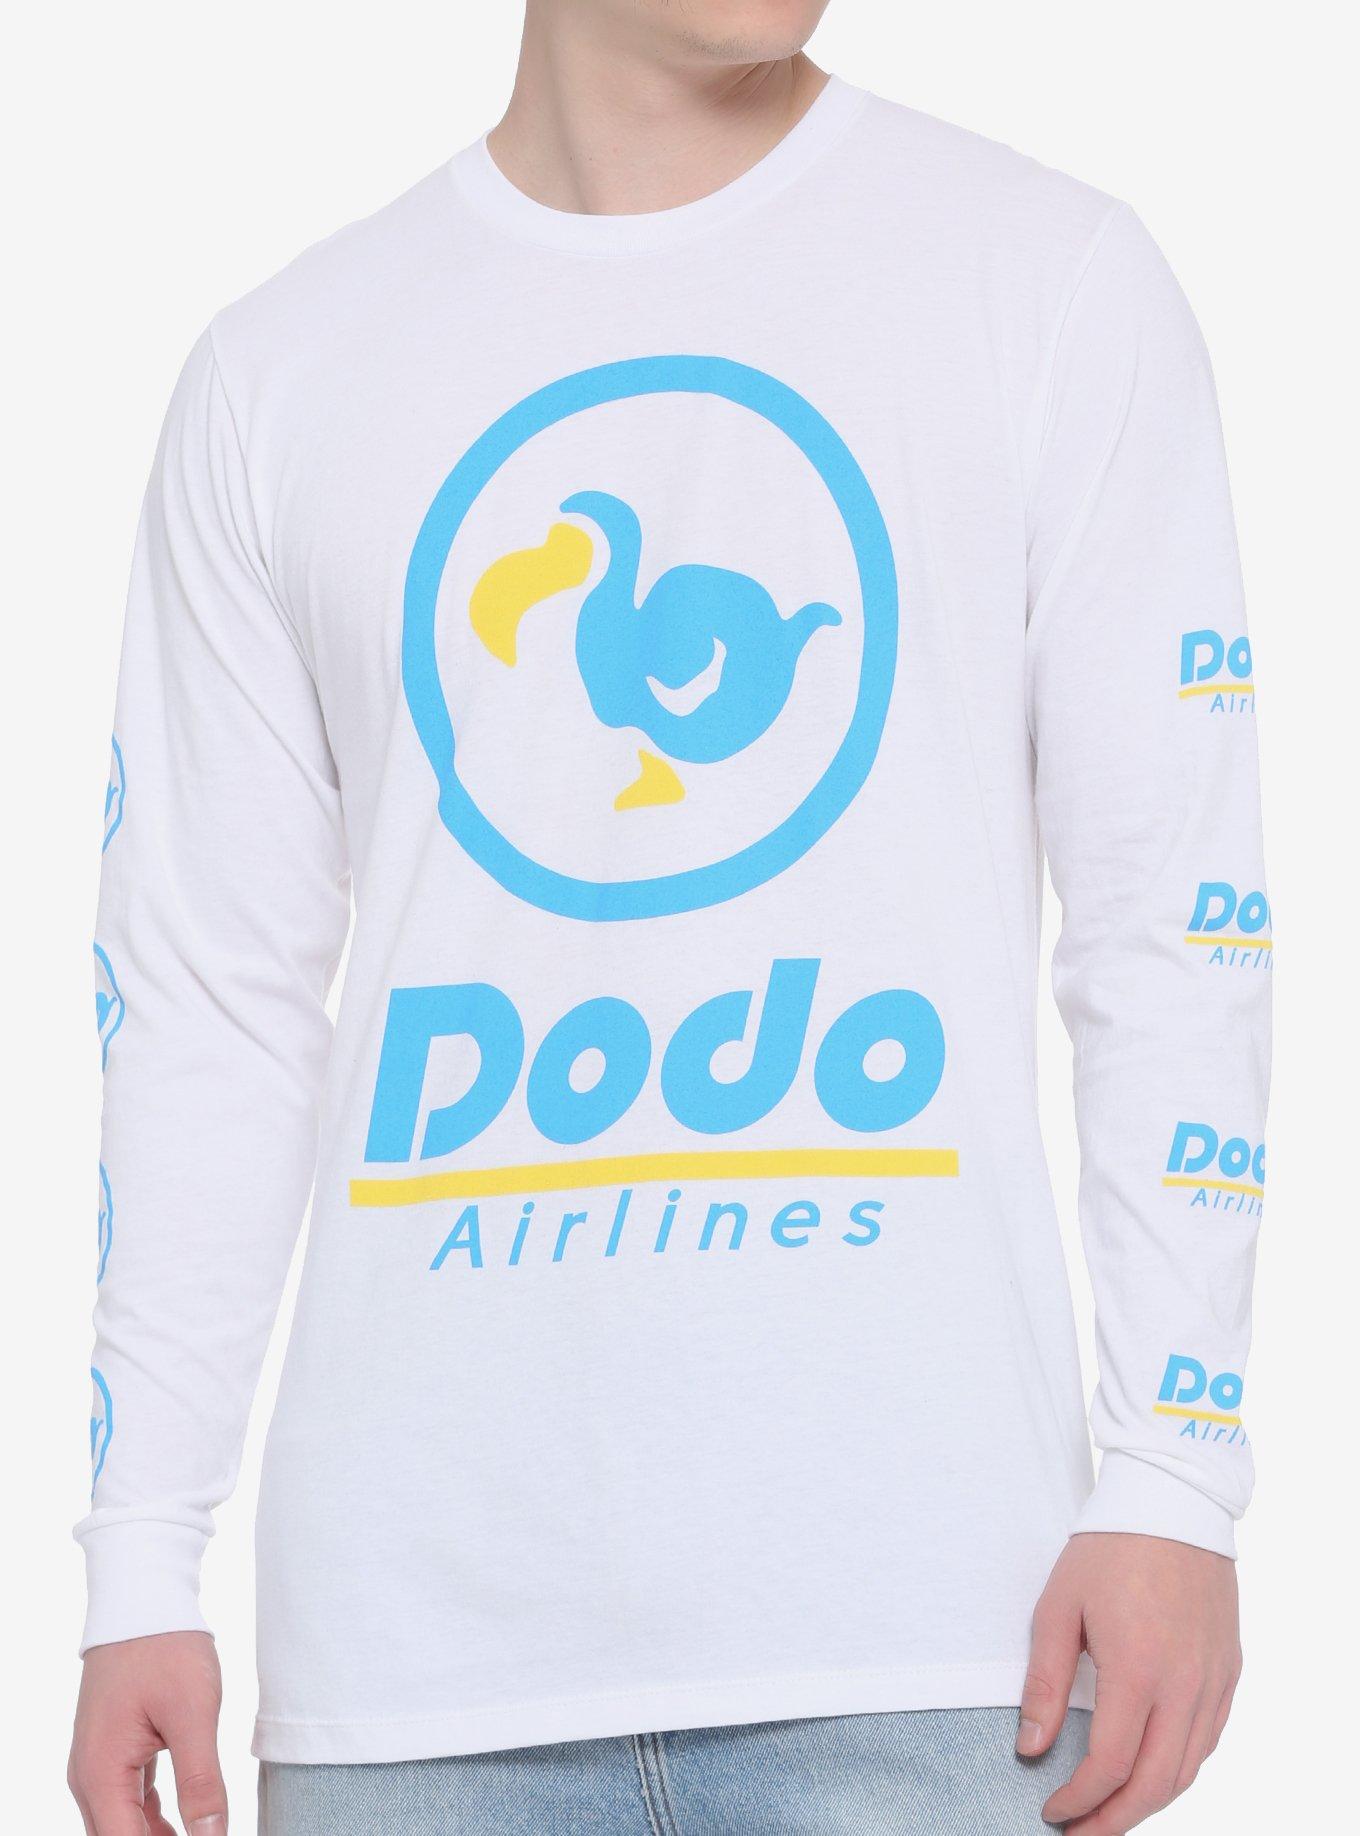 Animal Crossing: New Horizons Dodo Airlines Long-Sleeve T-Shirt, BLUE, hi-res